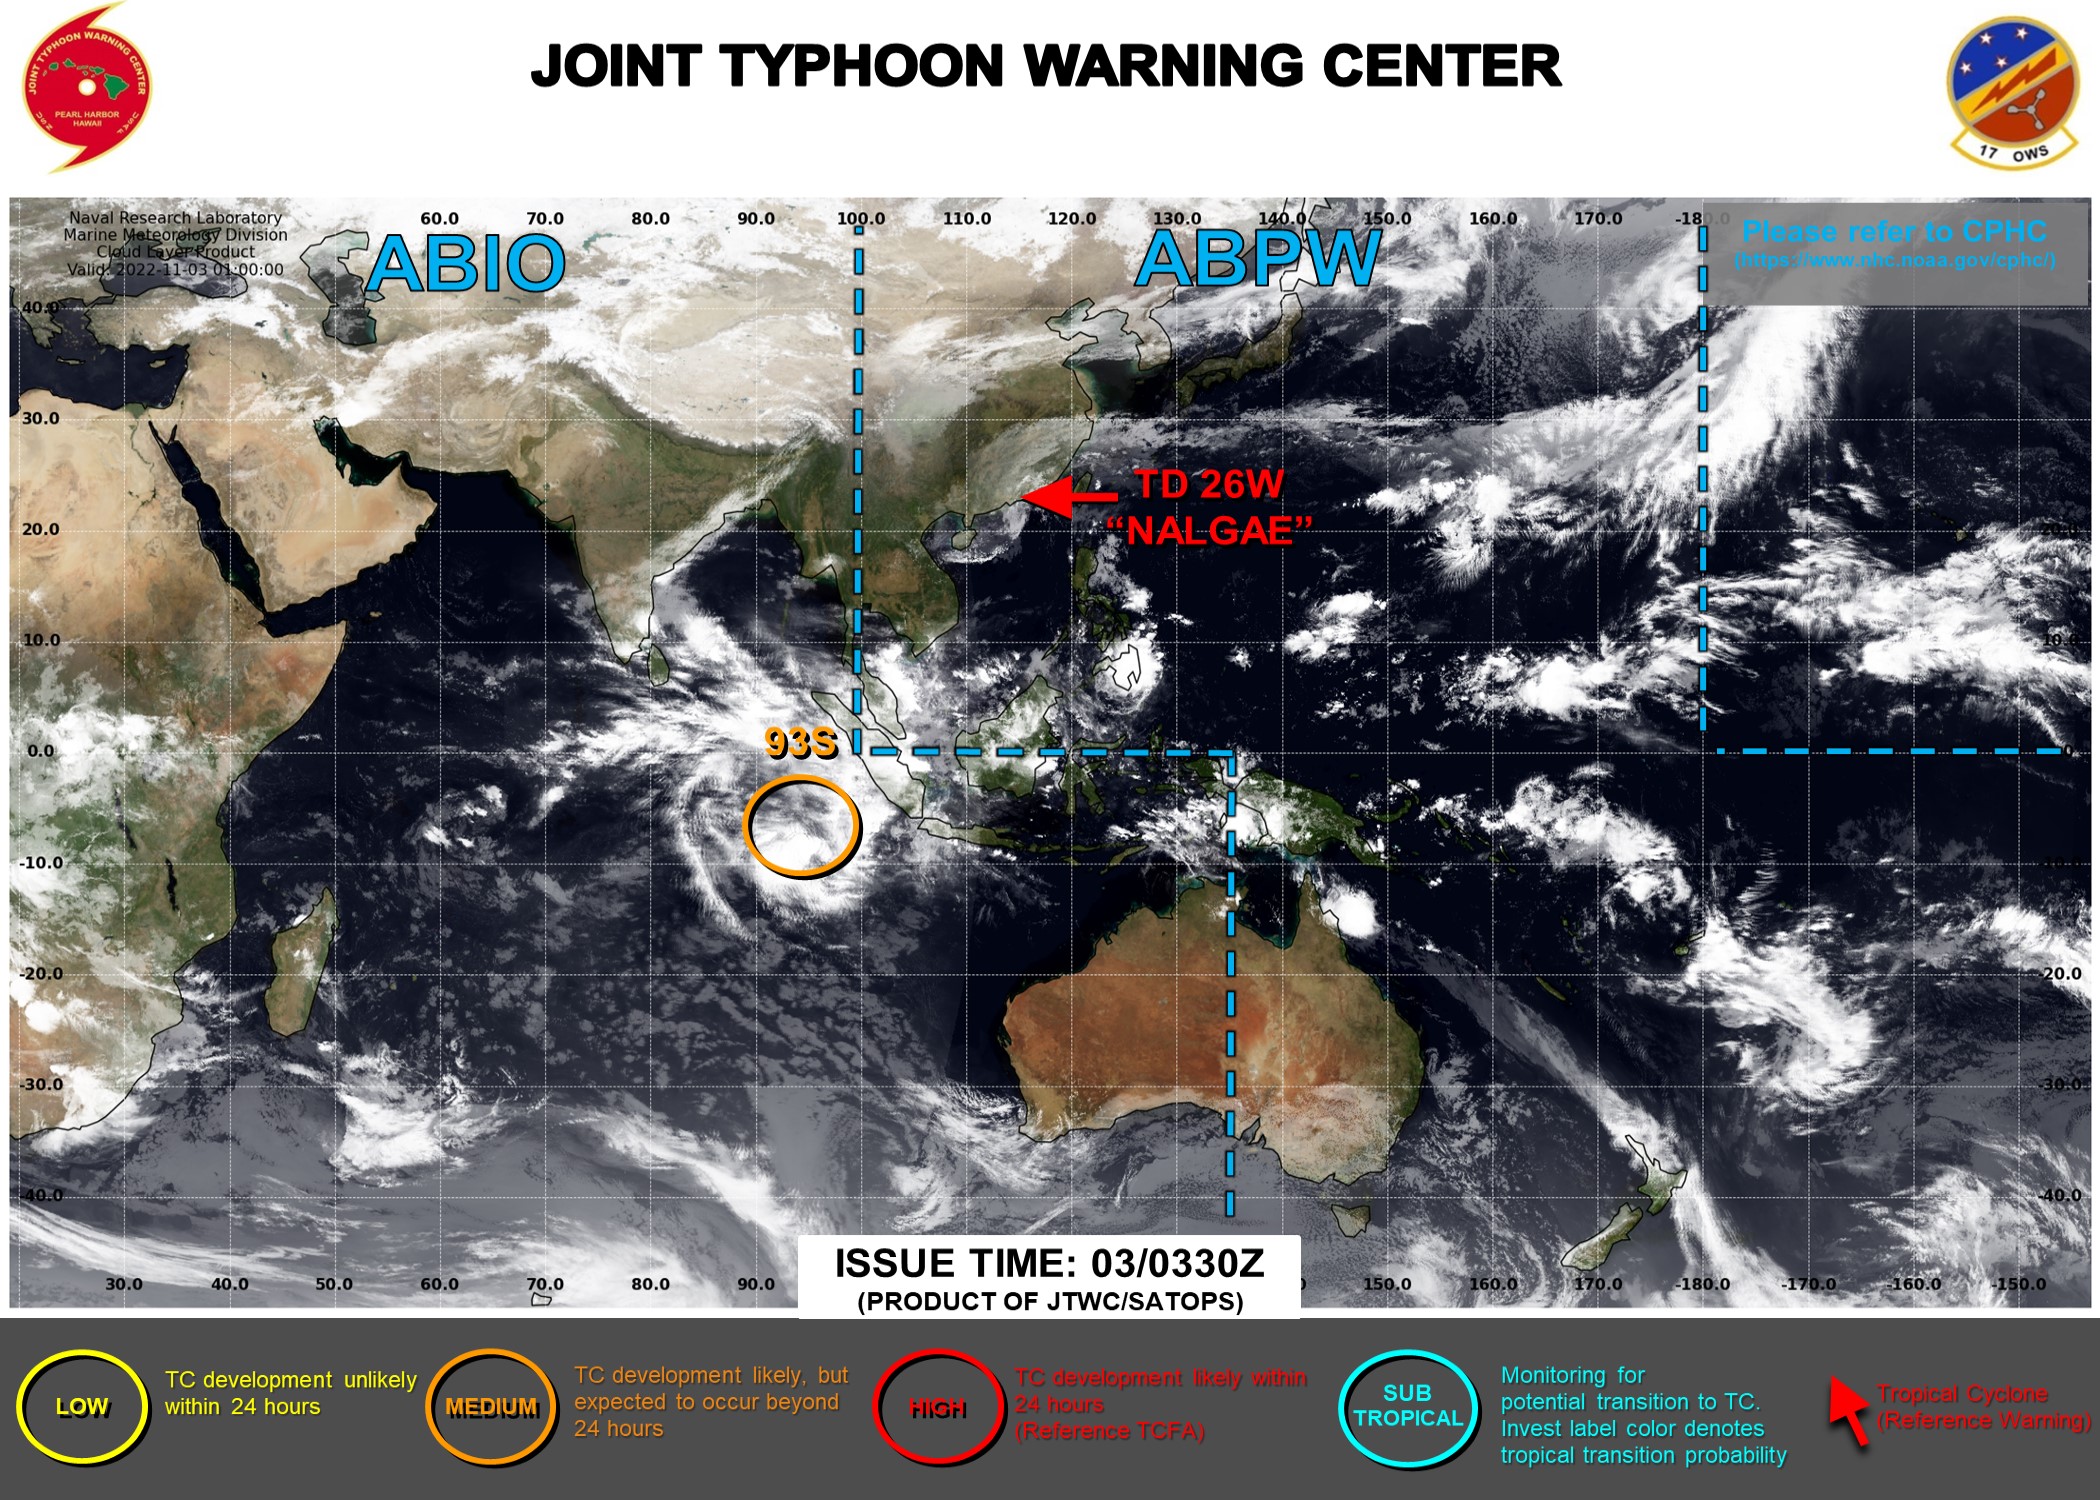 JTWC: 3HOURLY SATELLITE BULLETINS WERE DISCONTINUED AT 03/0540UTC ON 26W(NALGAE). THEY ARE NOW ISSUED ON INVEST 93S.